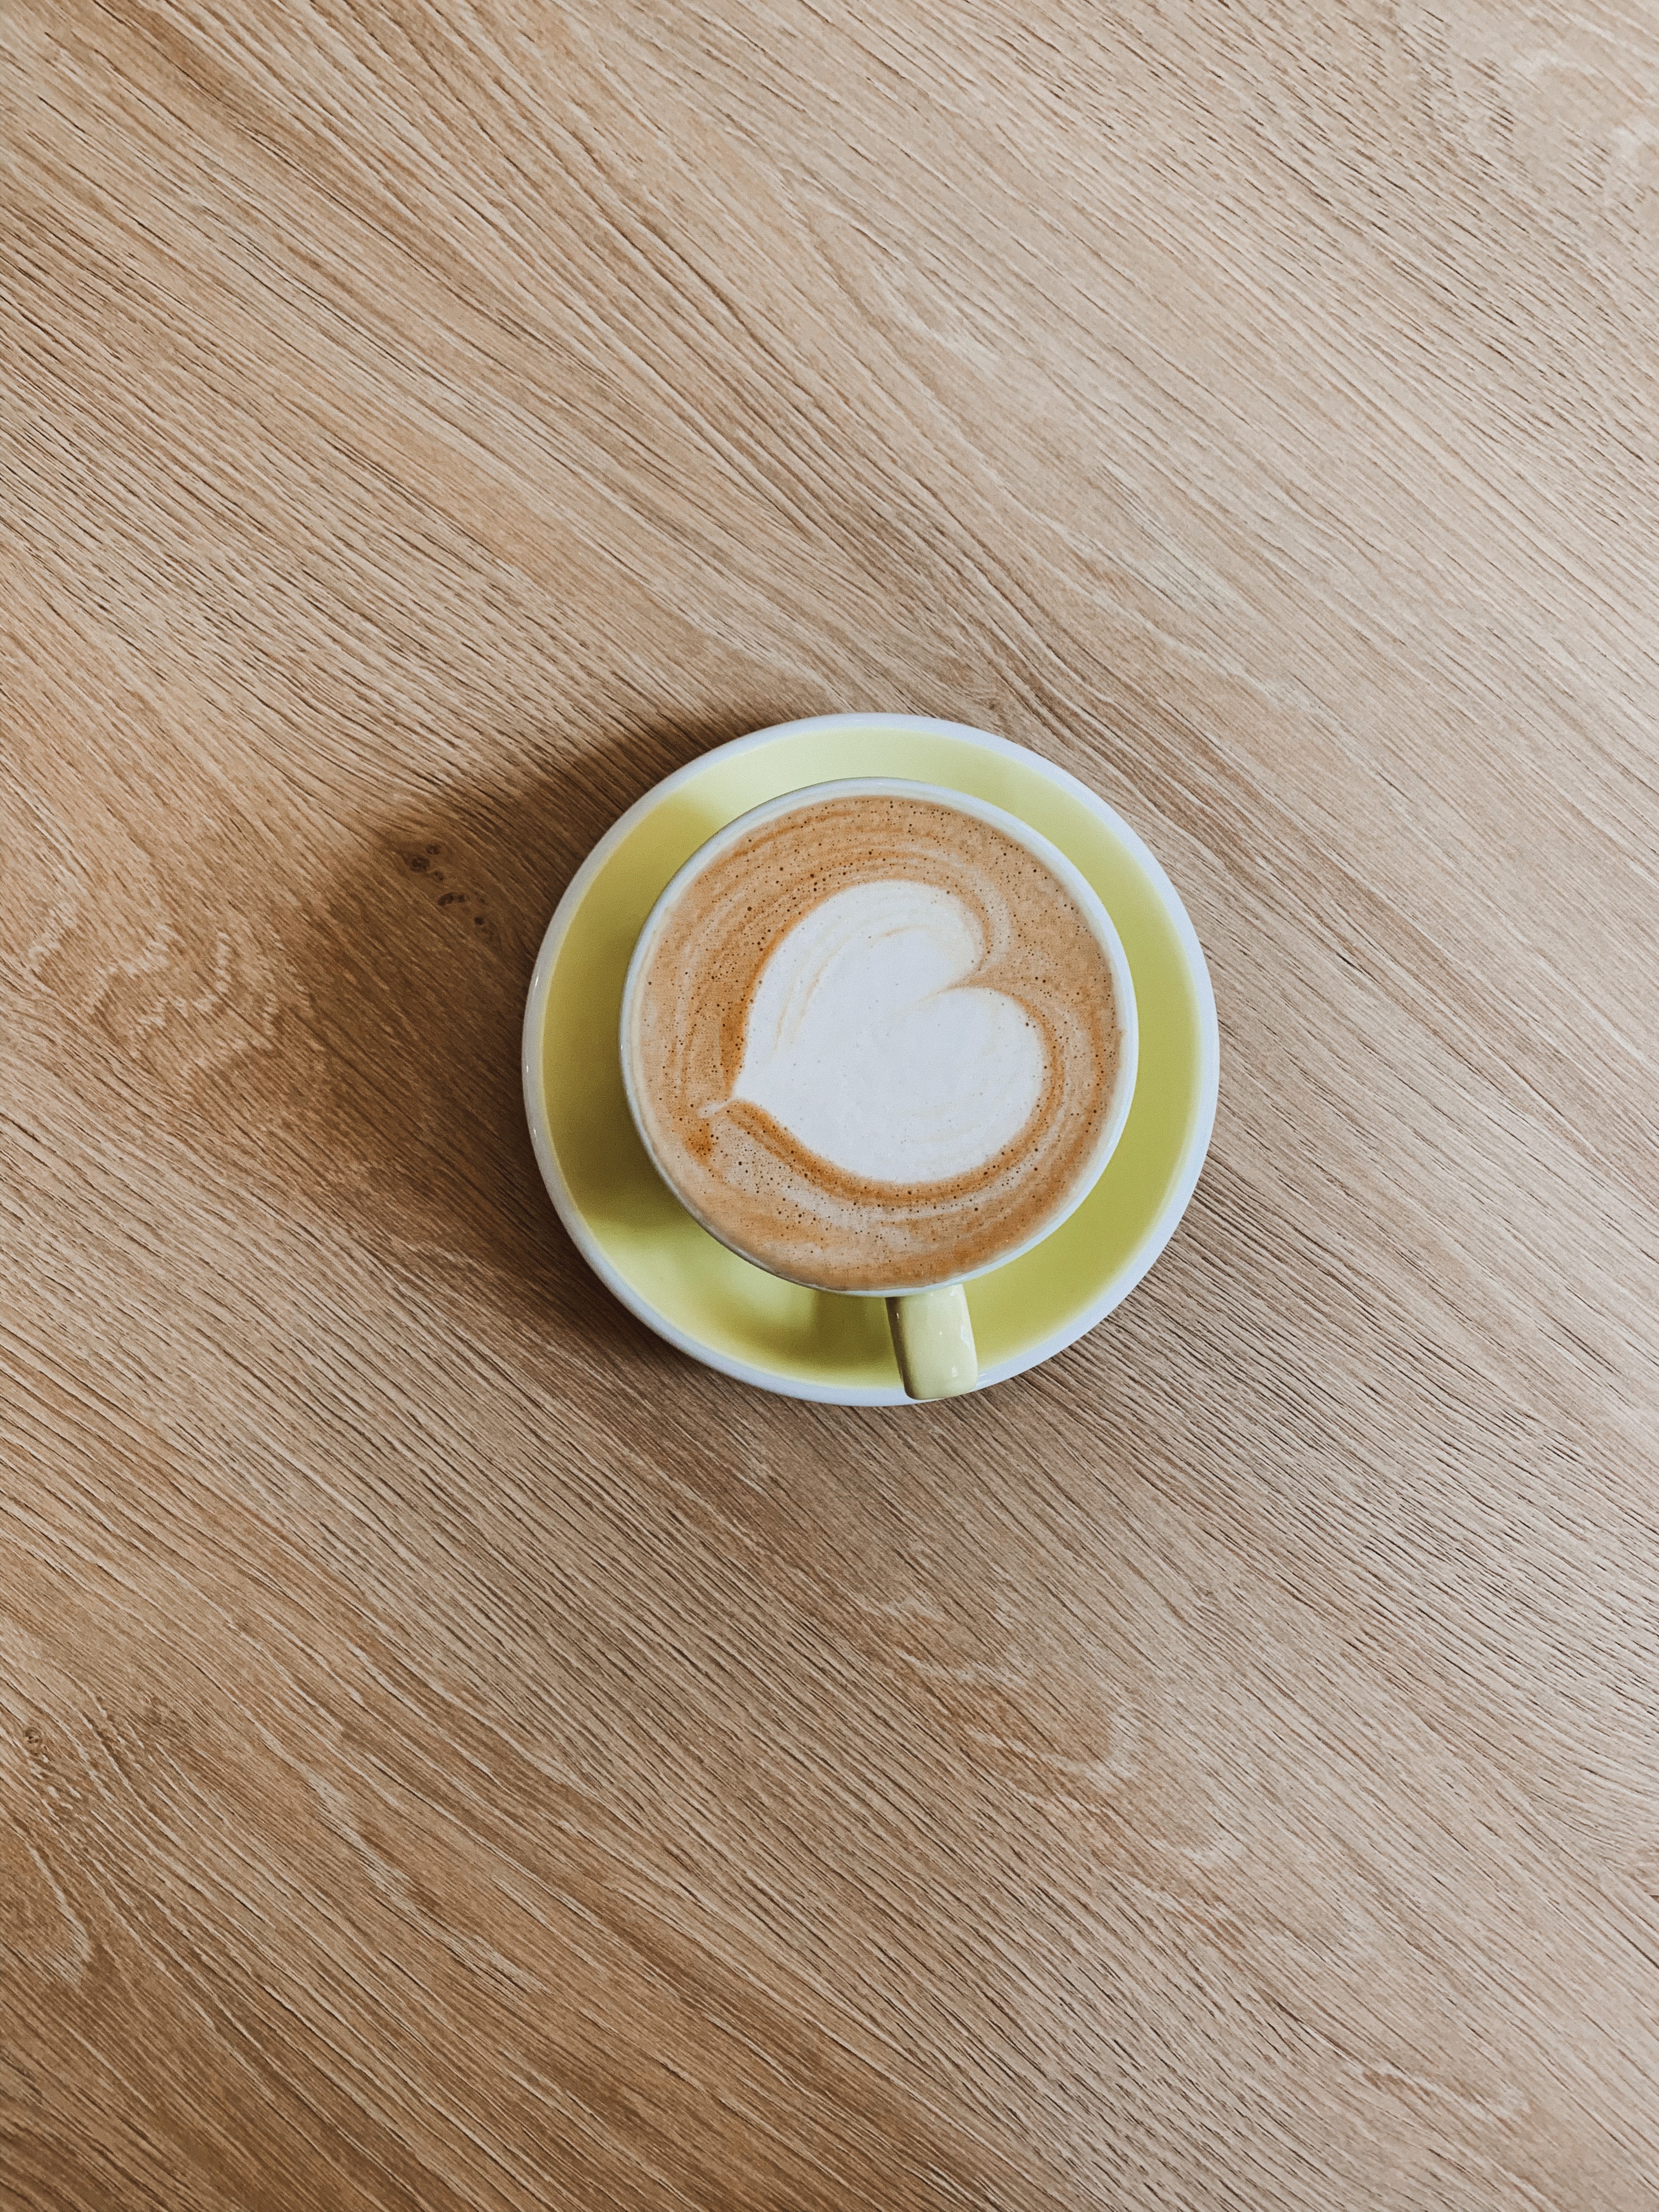 pattern, food, wood, wooden, cup, cappuccino, drink, beverage